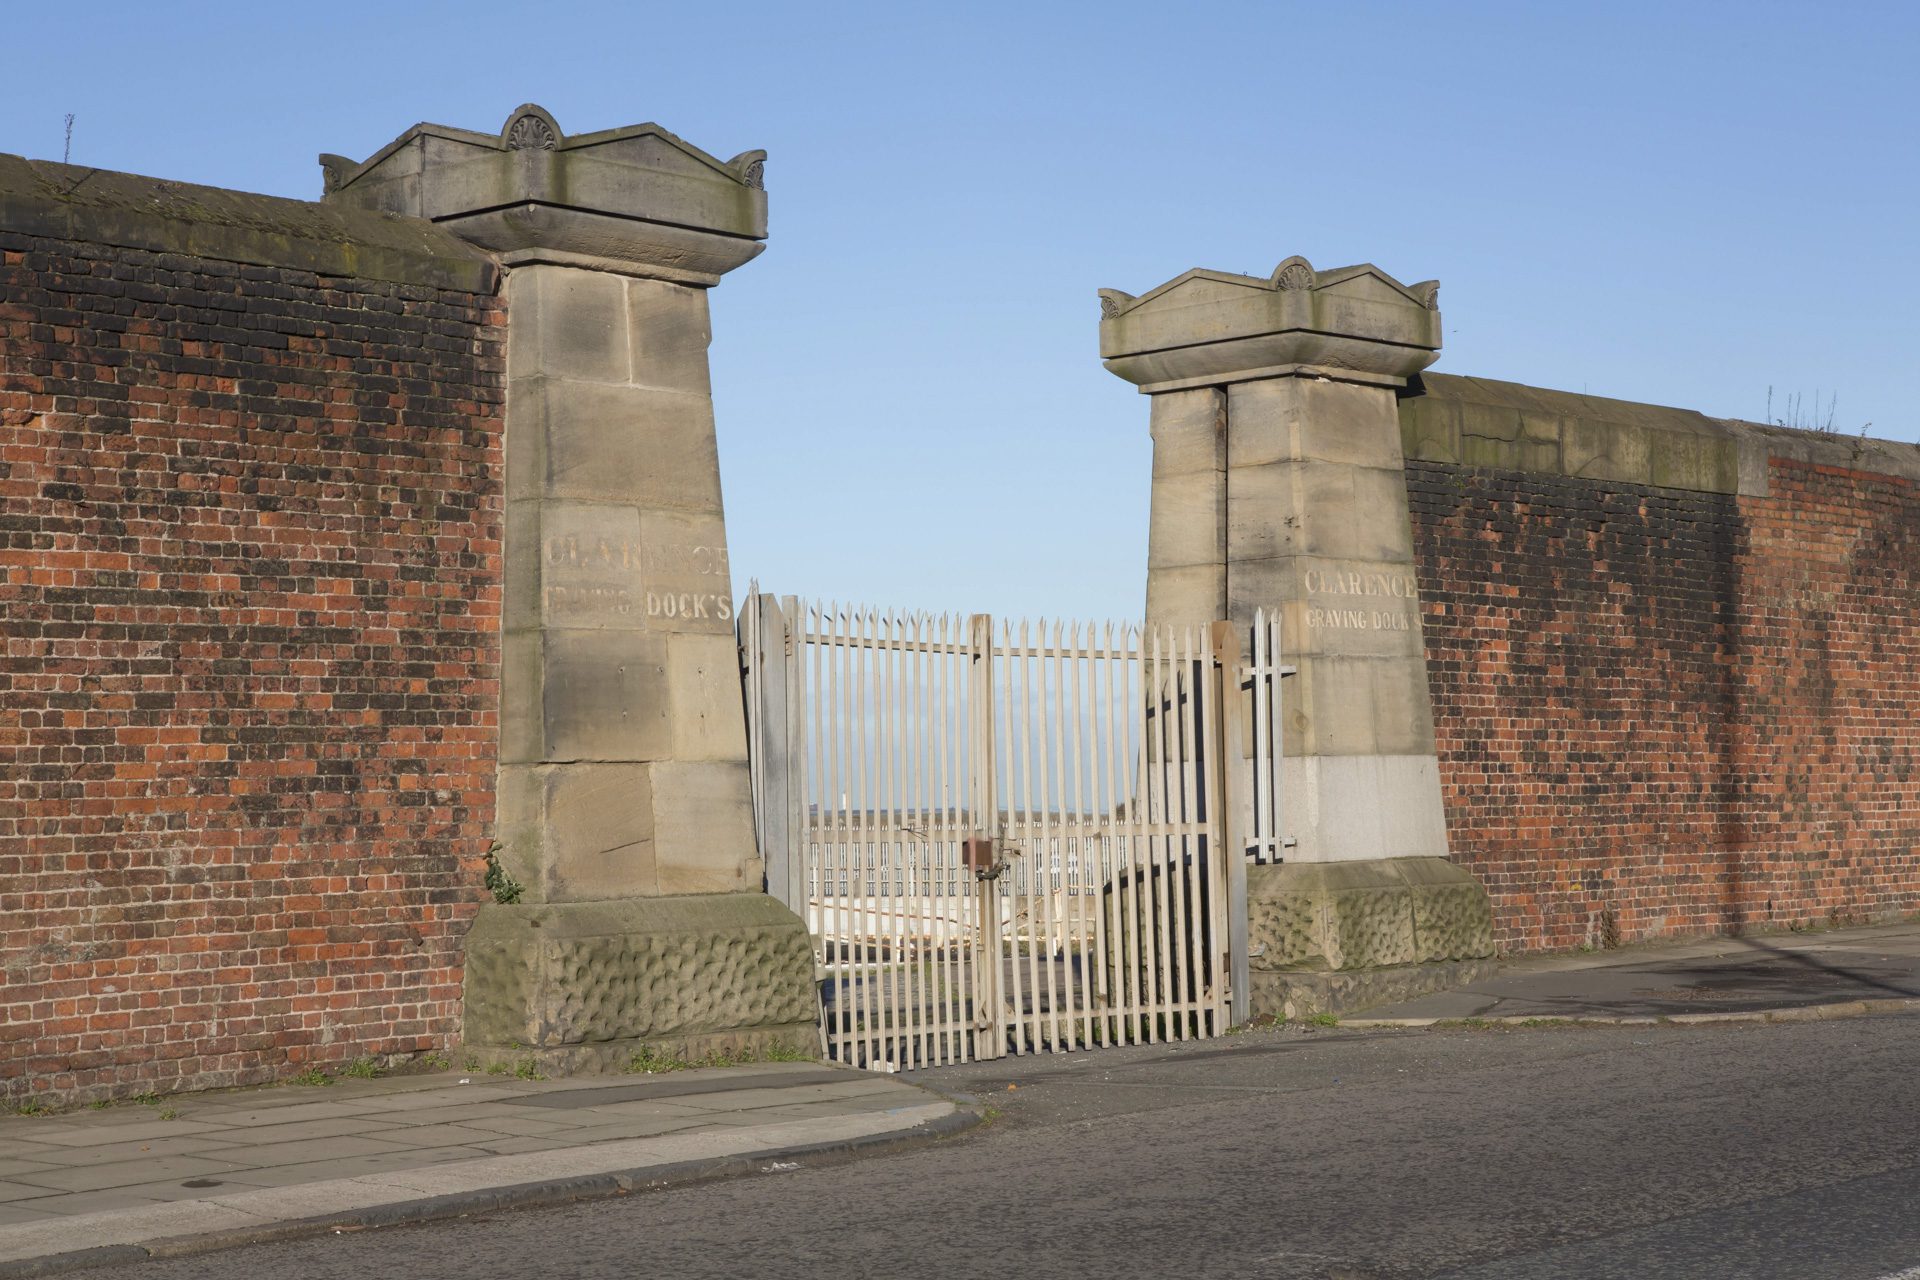 OCTOBER 27 2017, LIVERPOOL ENGLAND. The old dock gates at Clarence Graving Dock that was built in 1848 at Liverpool, UK.